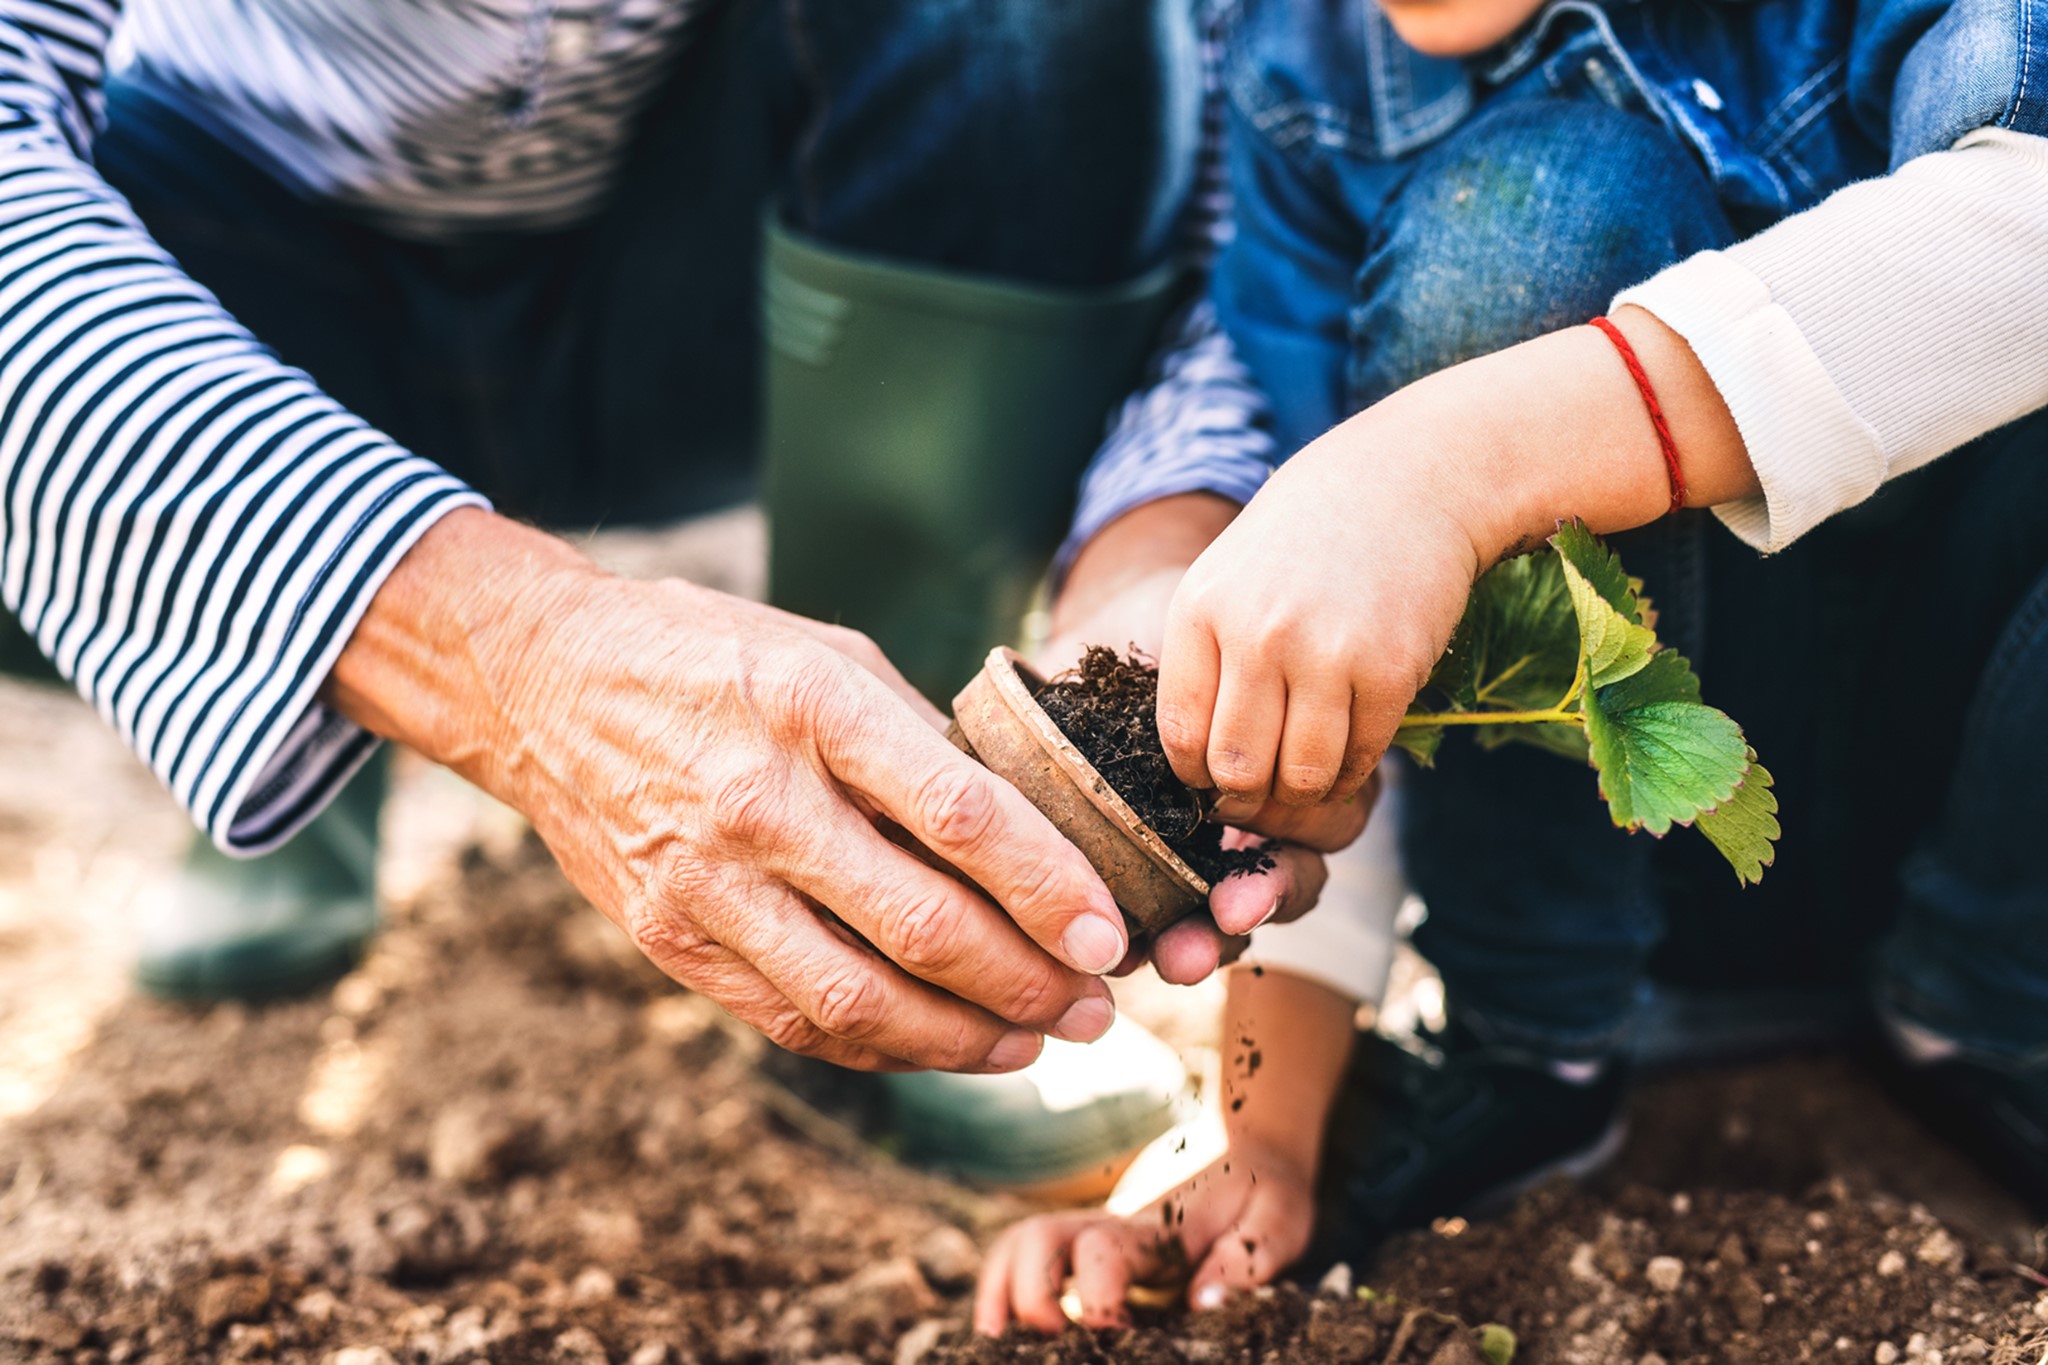 An elderly person and a young child are planting a plant